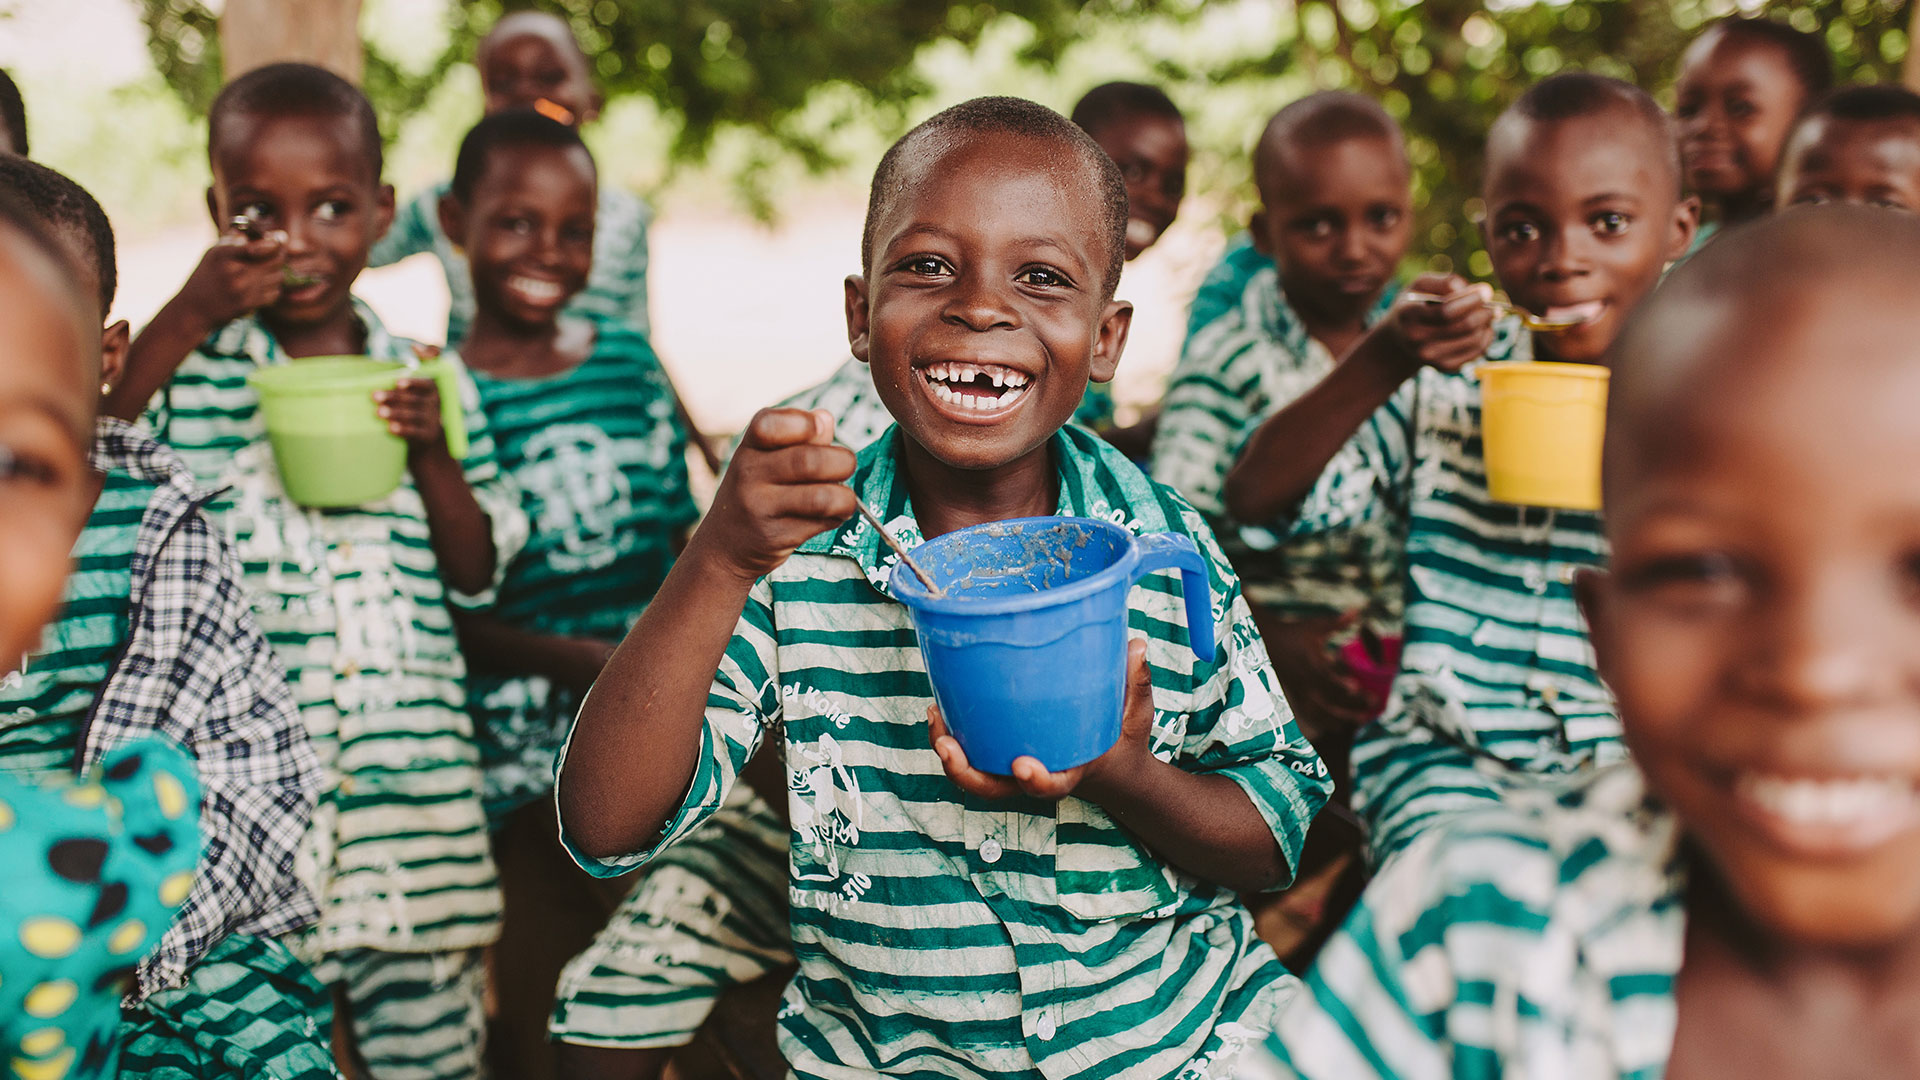 A group of children eat out of bowls and smile